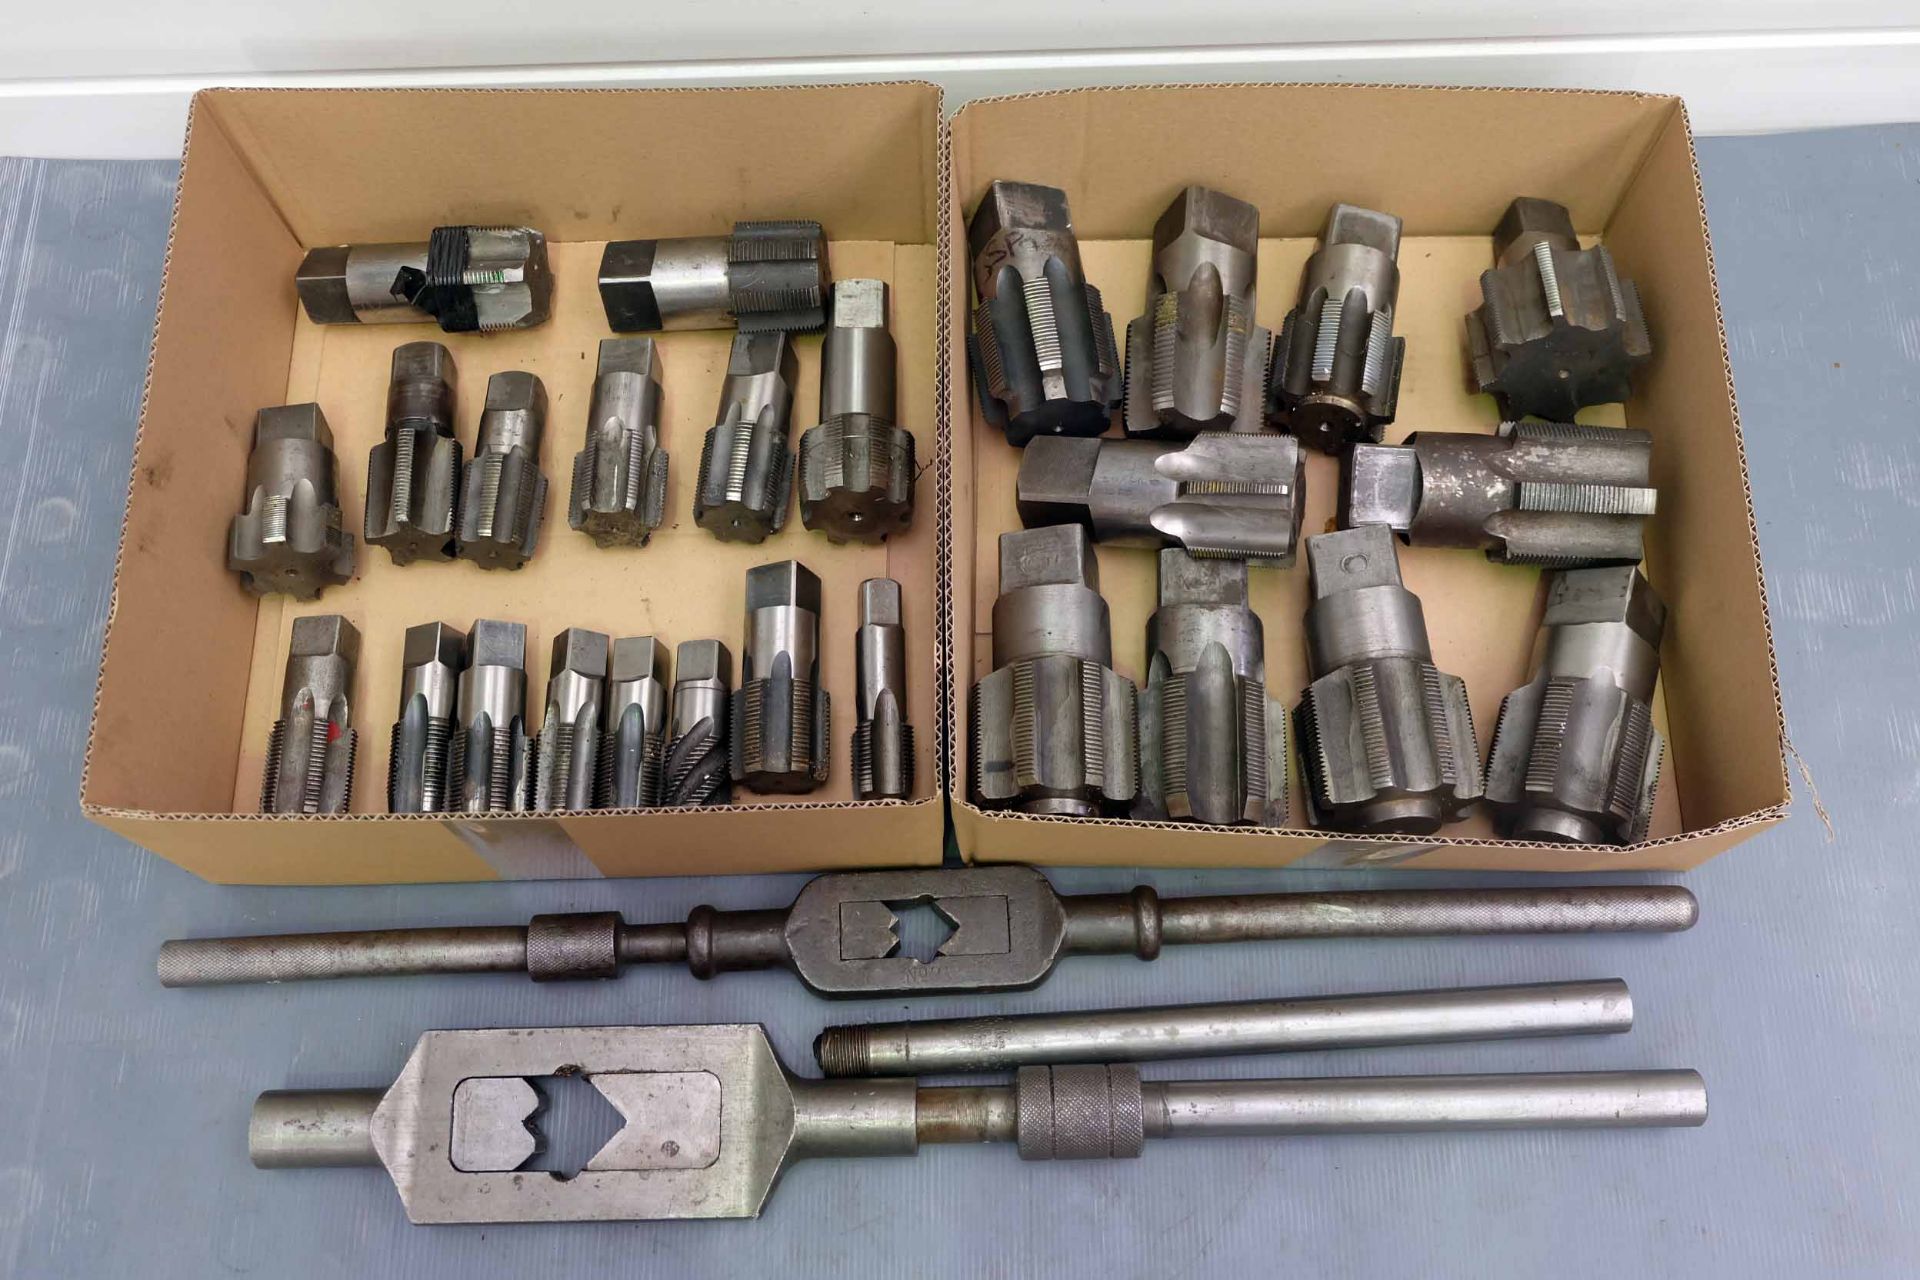 Quantity of BSP Taps & Wrenches.